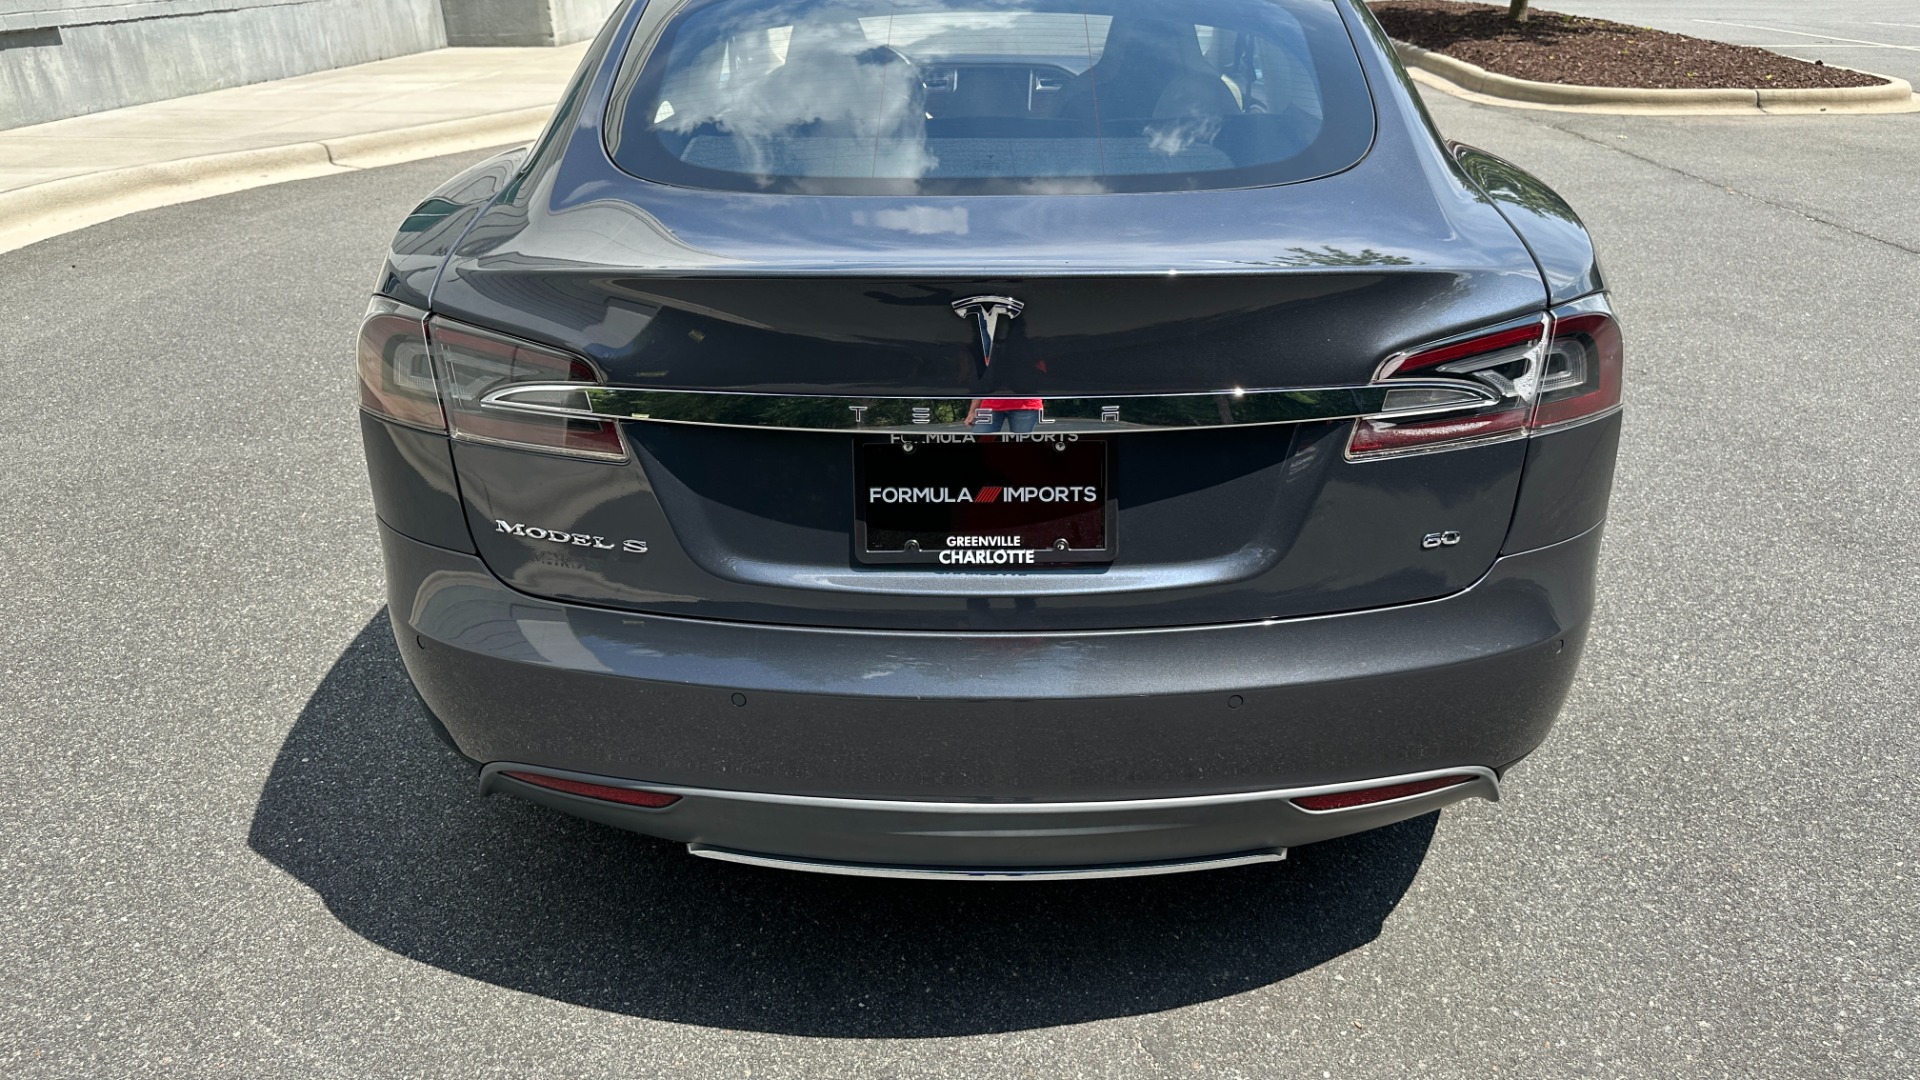 Used 2014 Tesla Model S 60 kWh Battery / 60D / PREMIUM CONNECTIVITY / LEATHER / SUNROOF for sale $22,995 at Formula Imports in Charlotte NC 28227 5